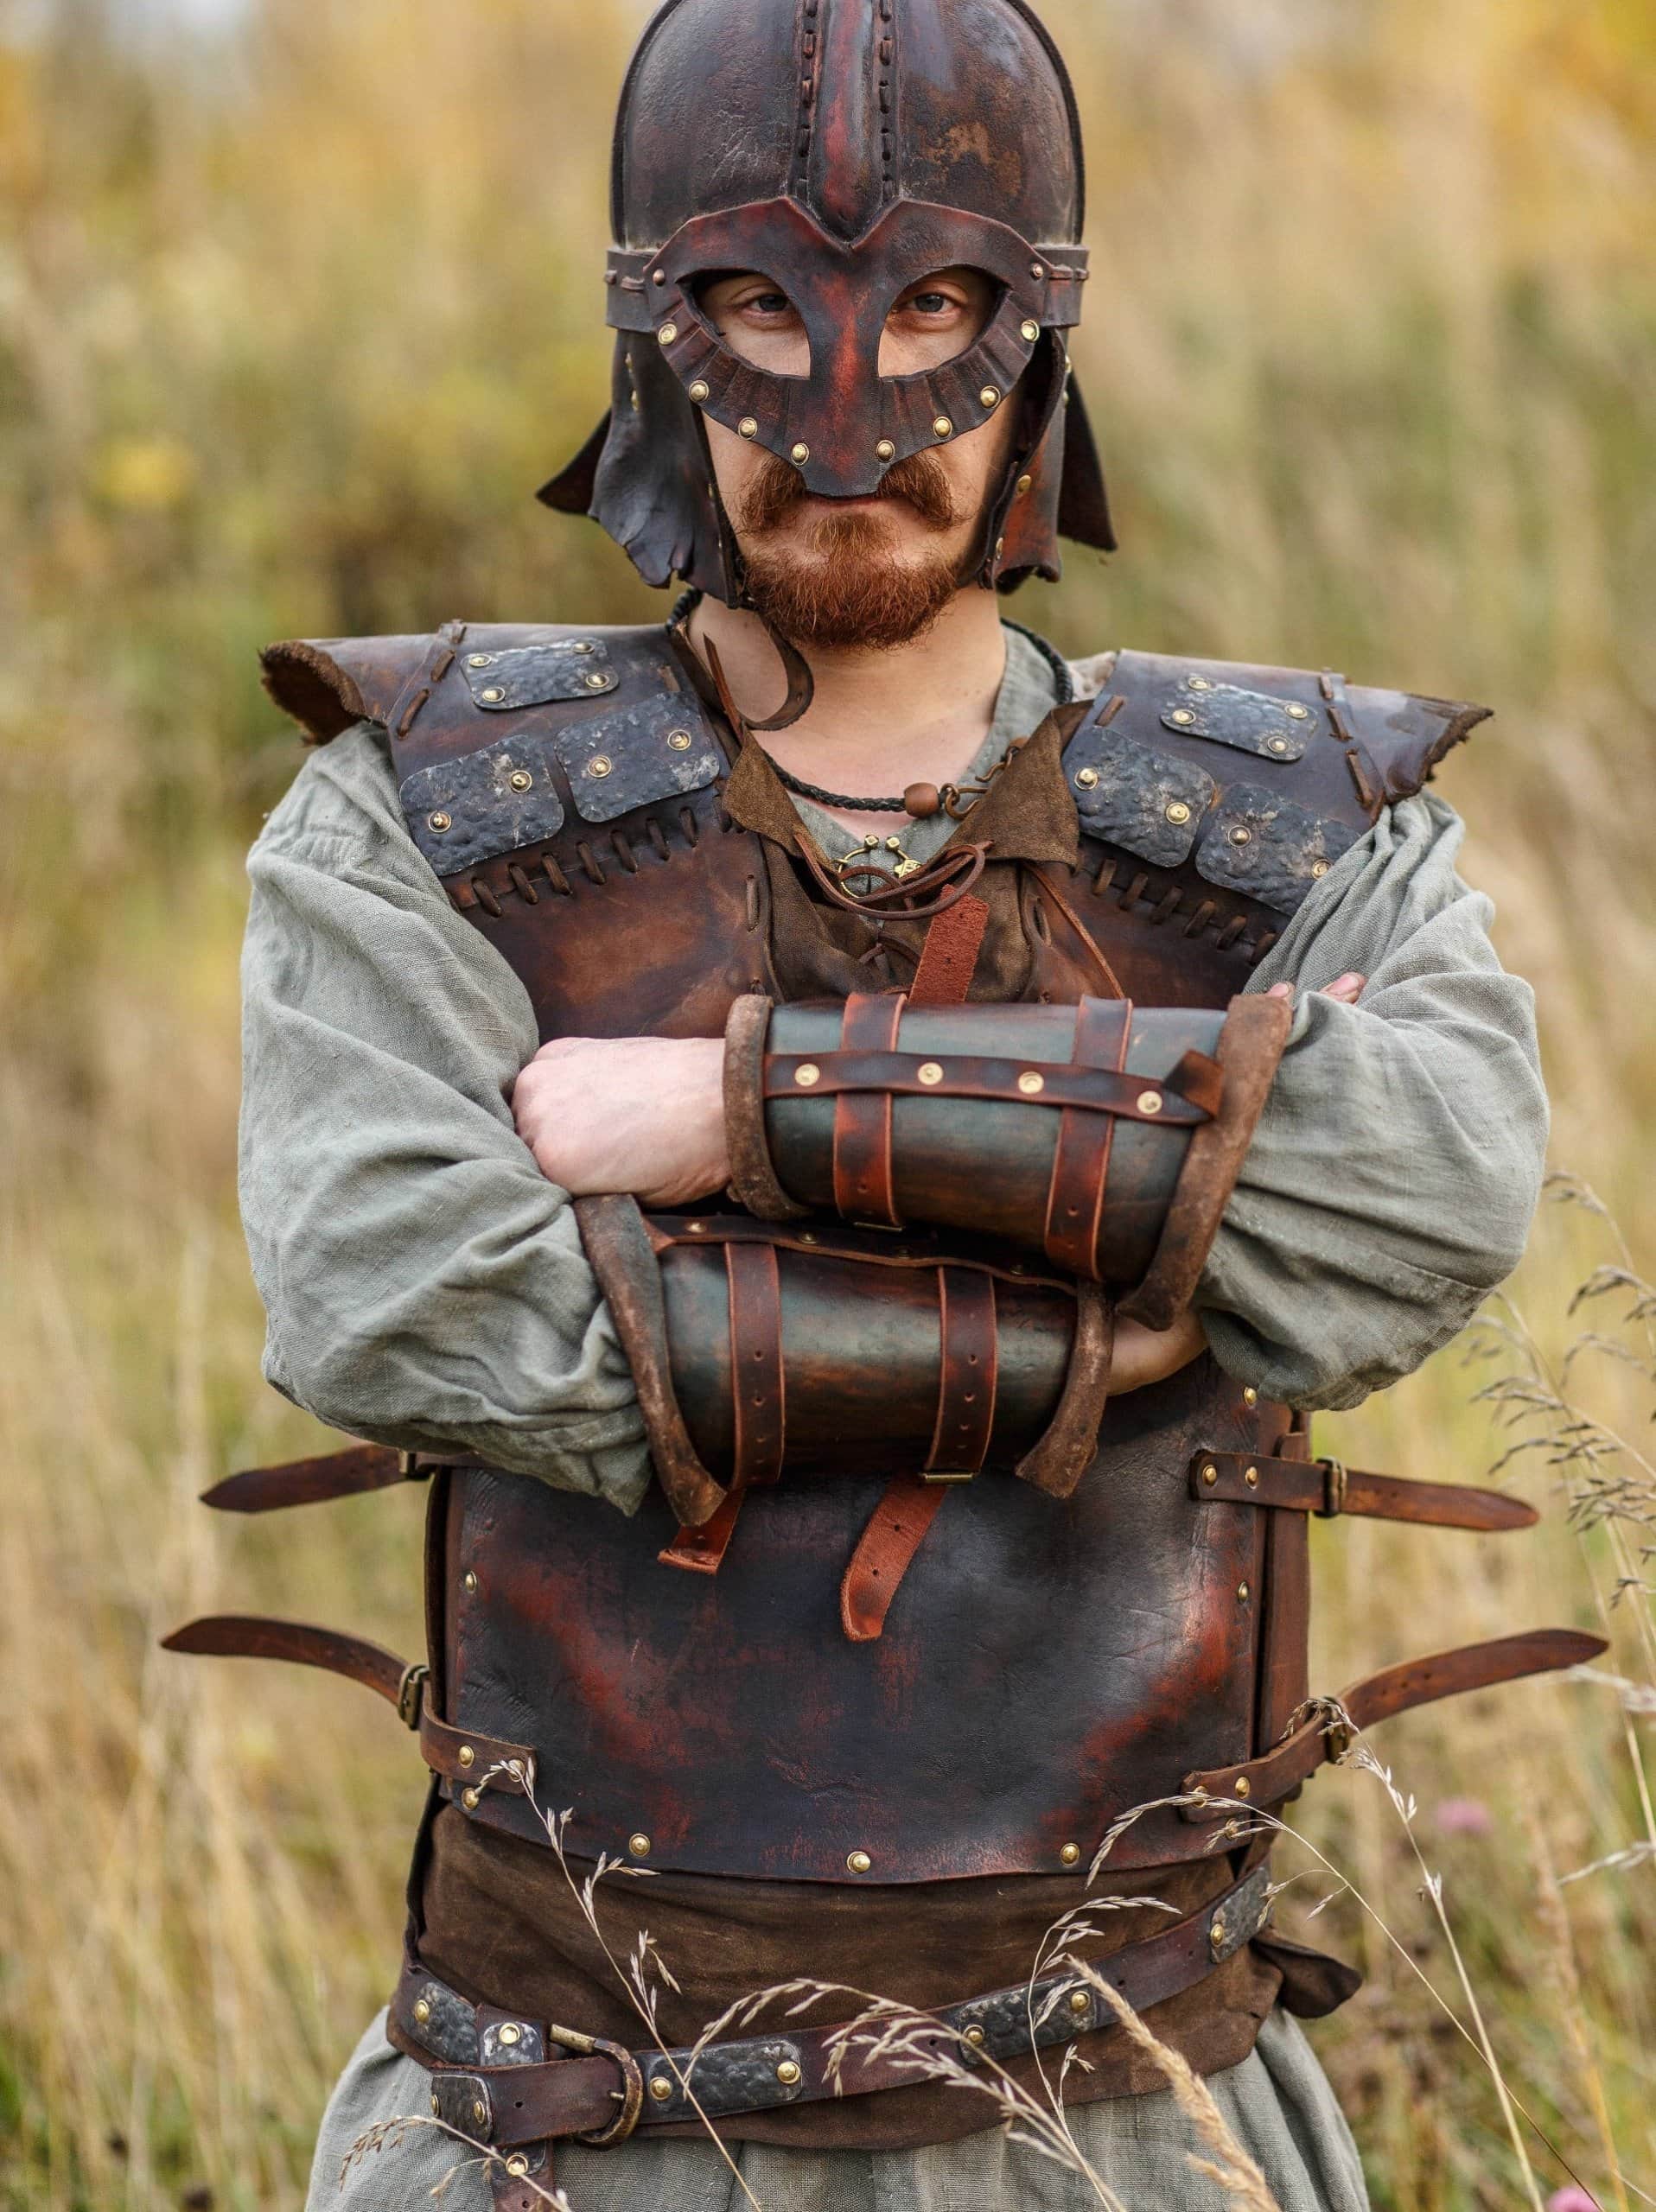 https://sokolworkshop.com/wp-content/uploads/2021/01/viking-leather-armour-5ffb7ec5-scaled.jpg